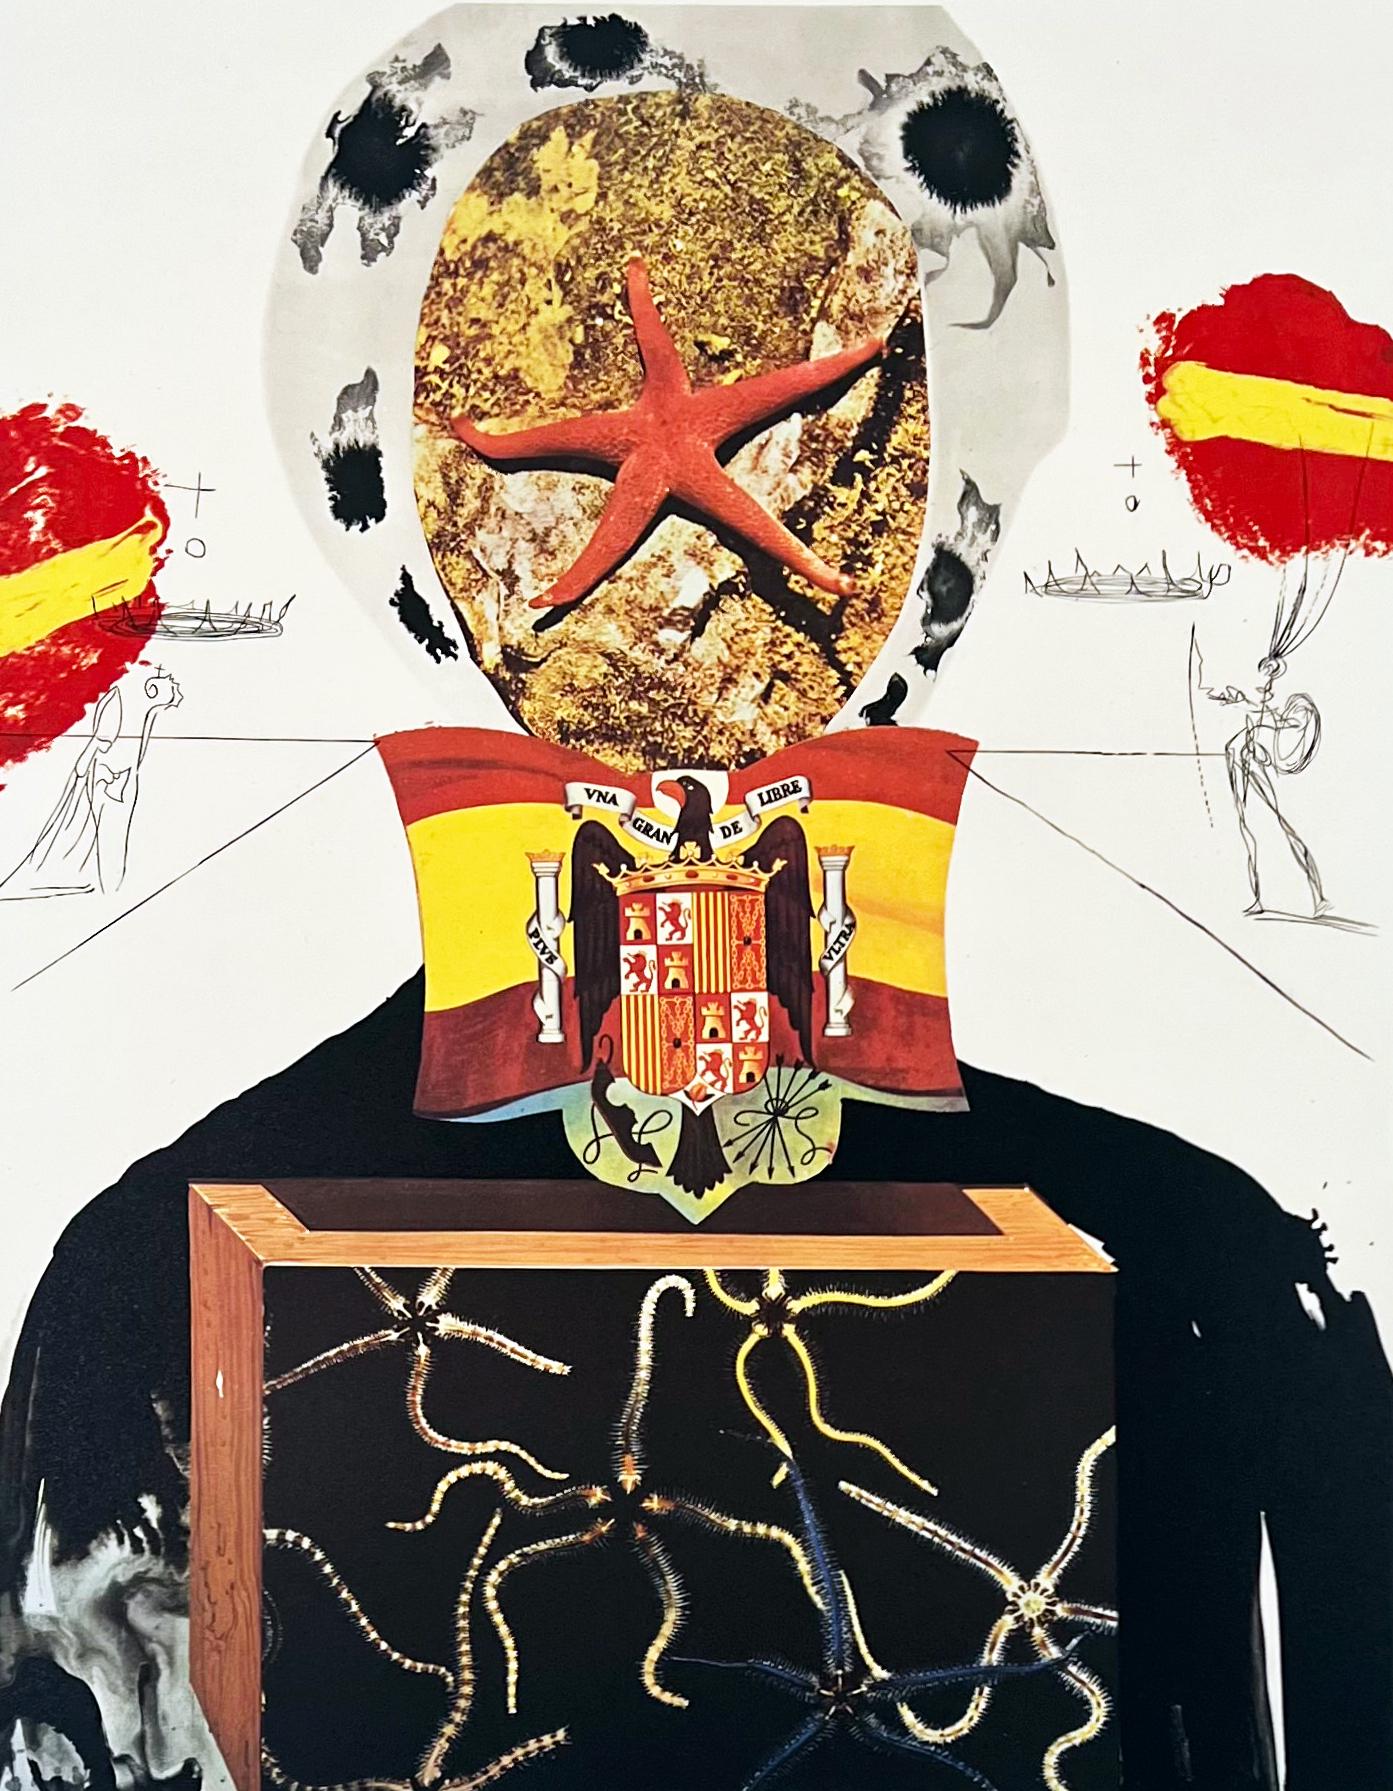 Salvador Dalí Abstract Print - Surrealist King, from 1971 Memories of Surrealism